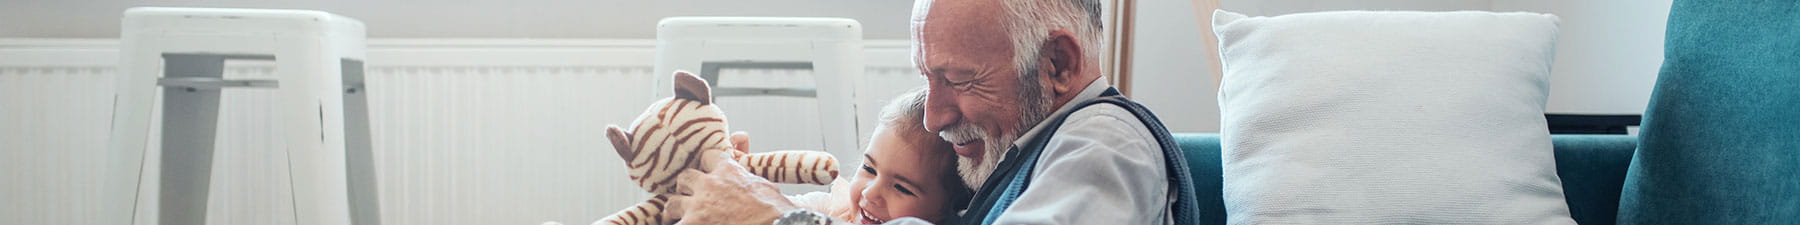 Elderly man and child with stuffed animal